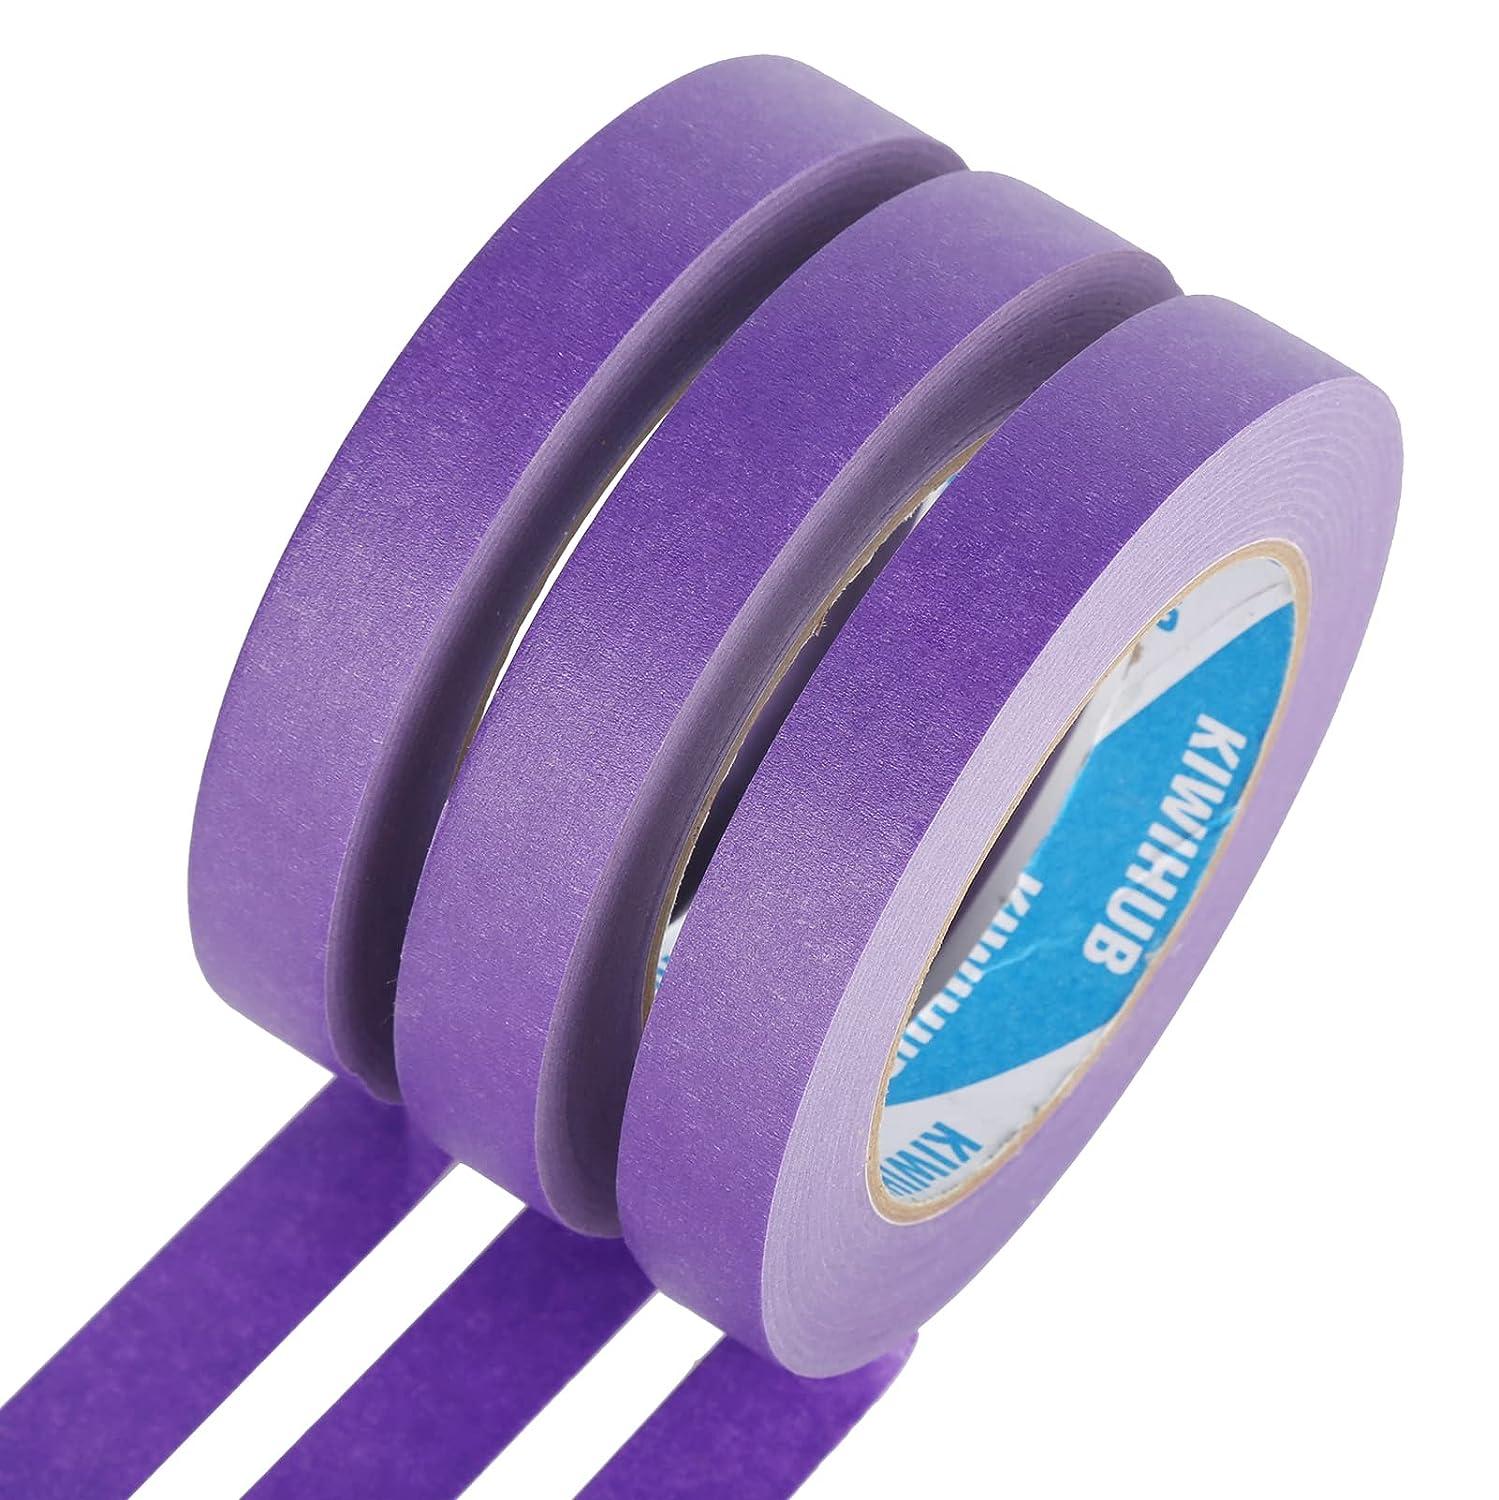 KIWIHUB Purple Painters Tape 0.7 x 60 Yards x 3 Rolls (180 Yards Total) -  Medium Adhesive Masking Tape for Painting Labeling DIY Crafting Decoration  and School Projects 0.7 60 yards Purple